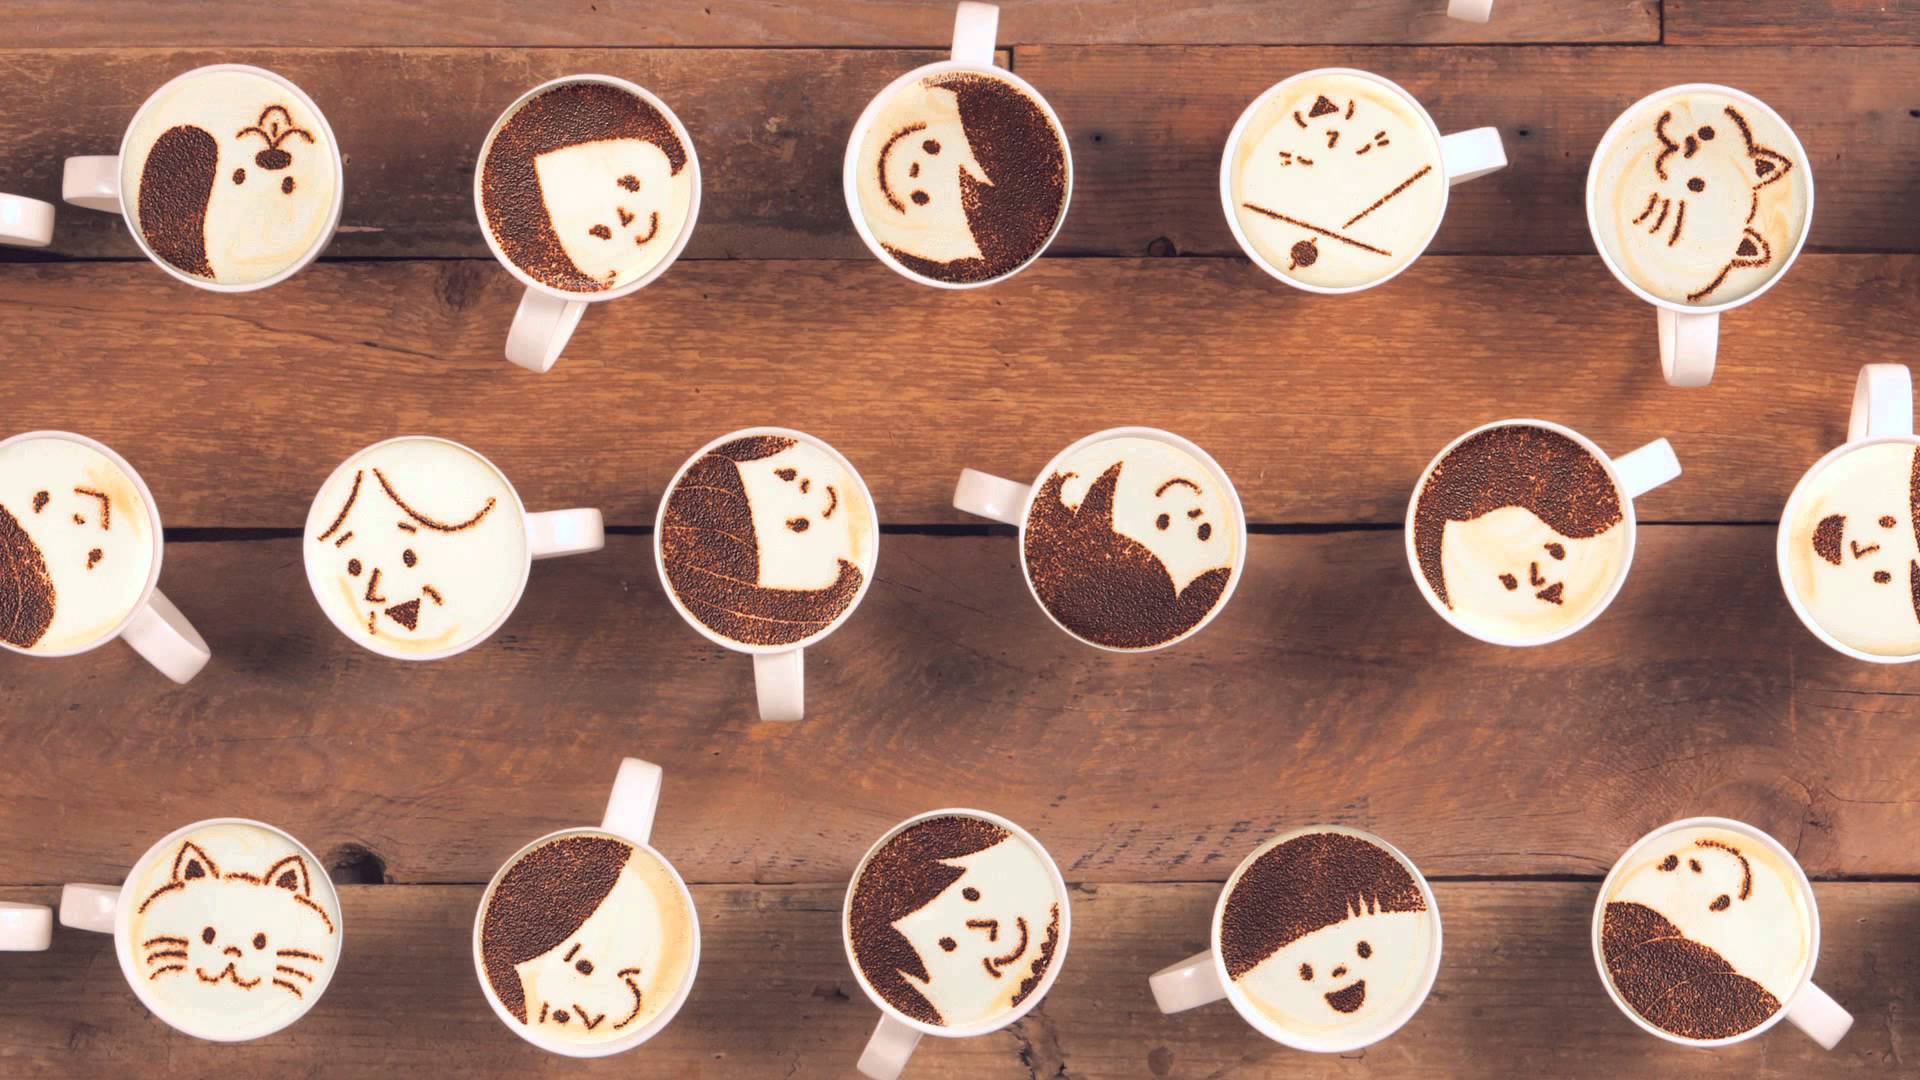 latte art with smiley faces